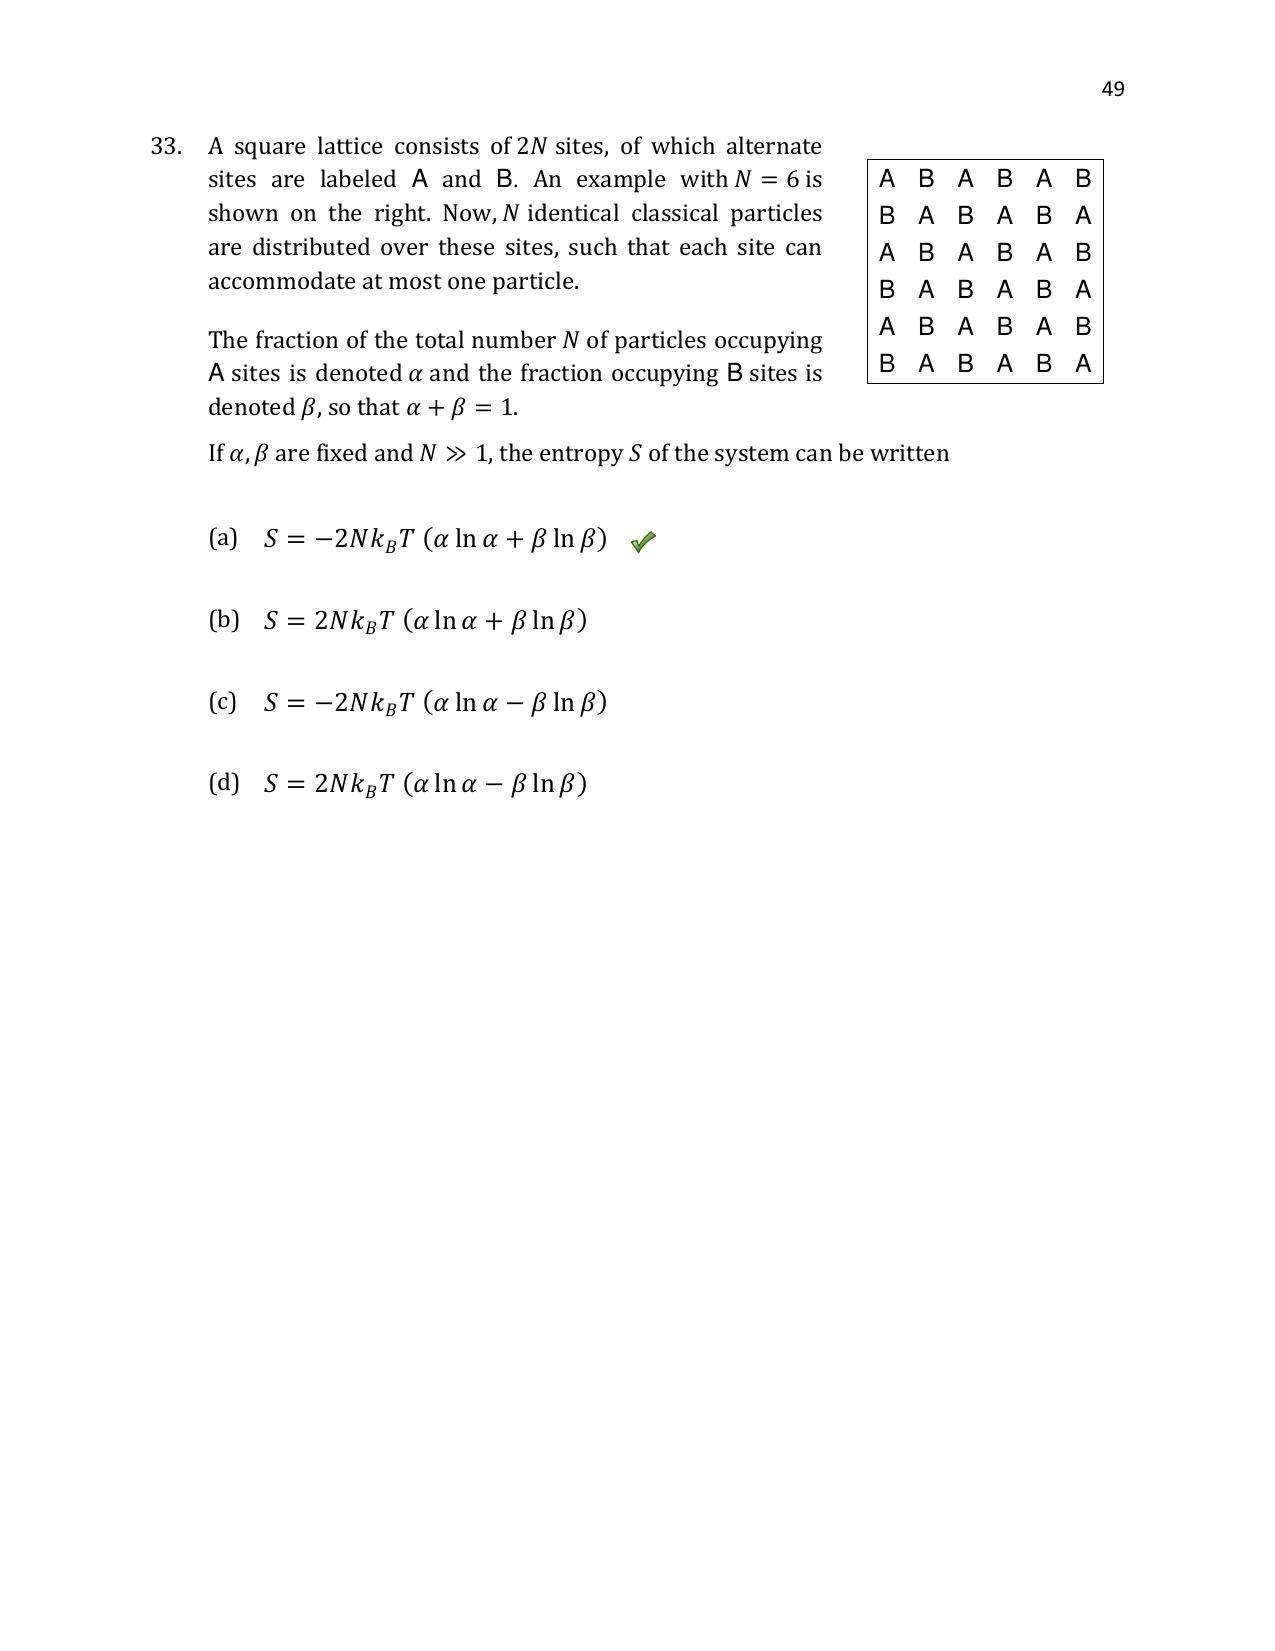 TIFR GS 2020 Physics Question Paper - Page 50